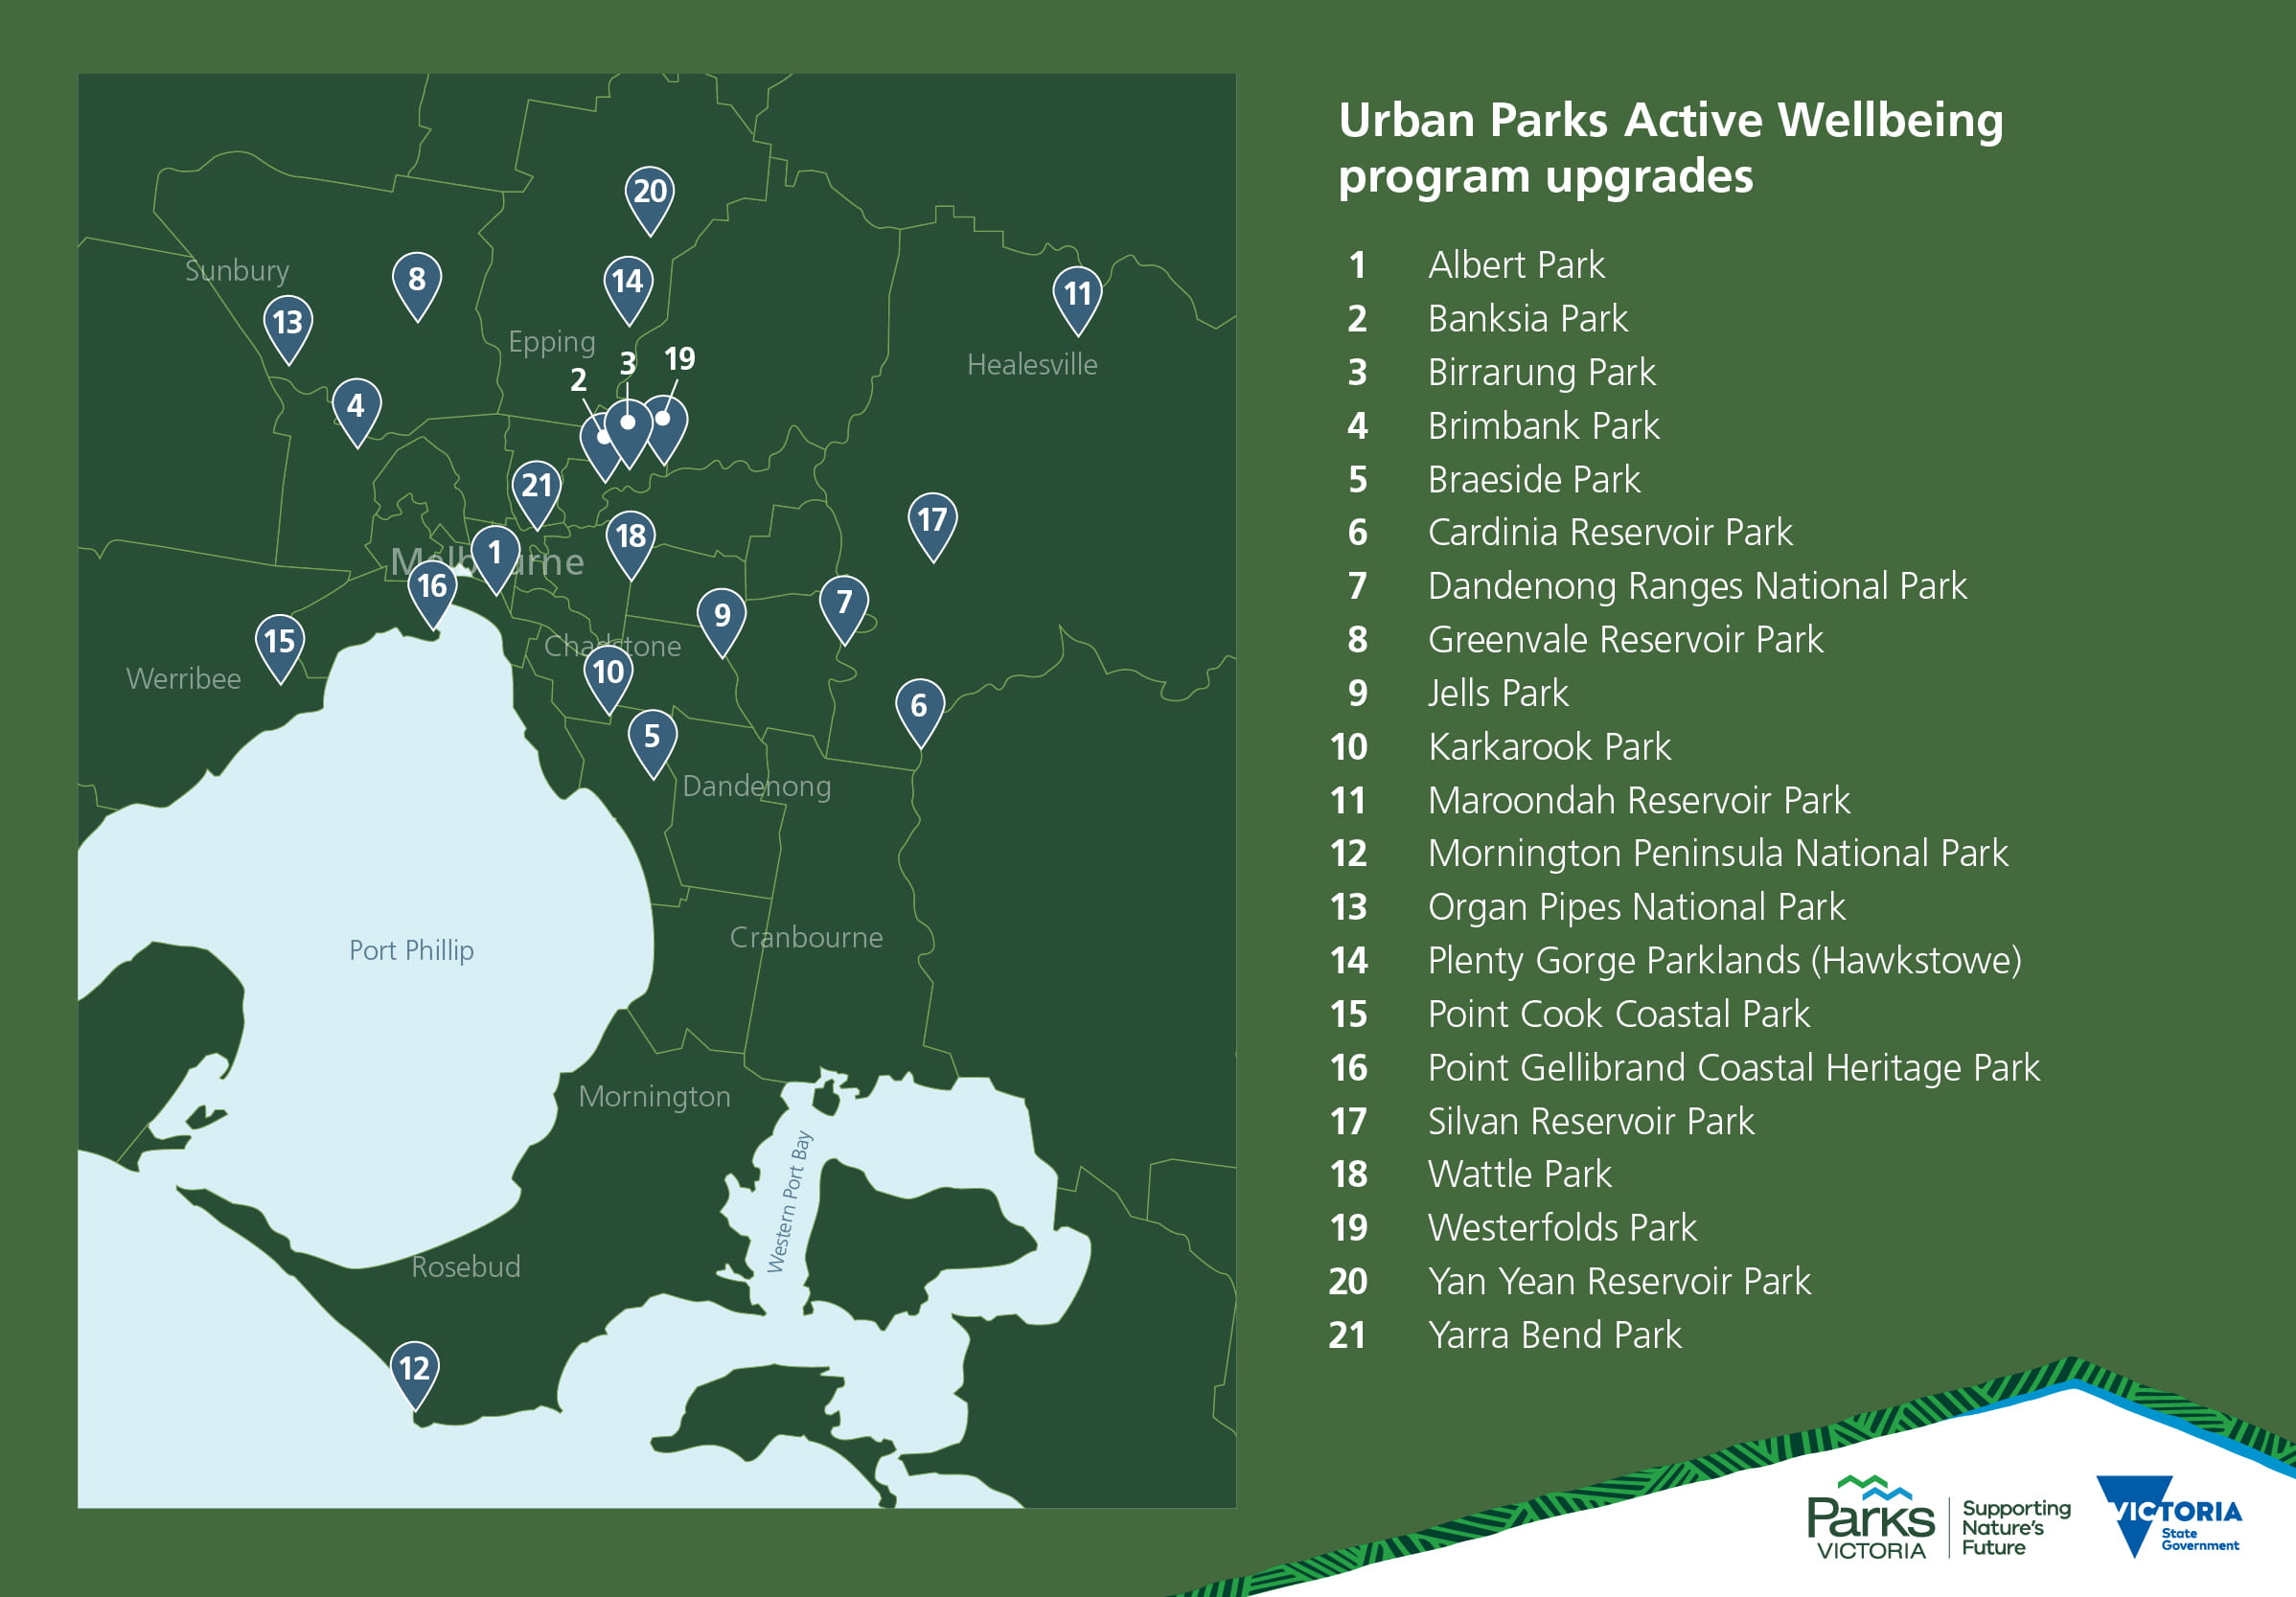 Map of sites receiving upgrades as part of Urban Active Wellbeing program